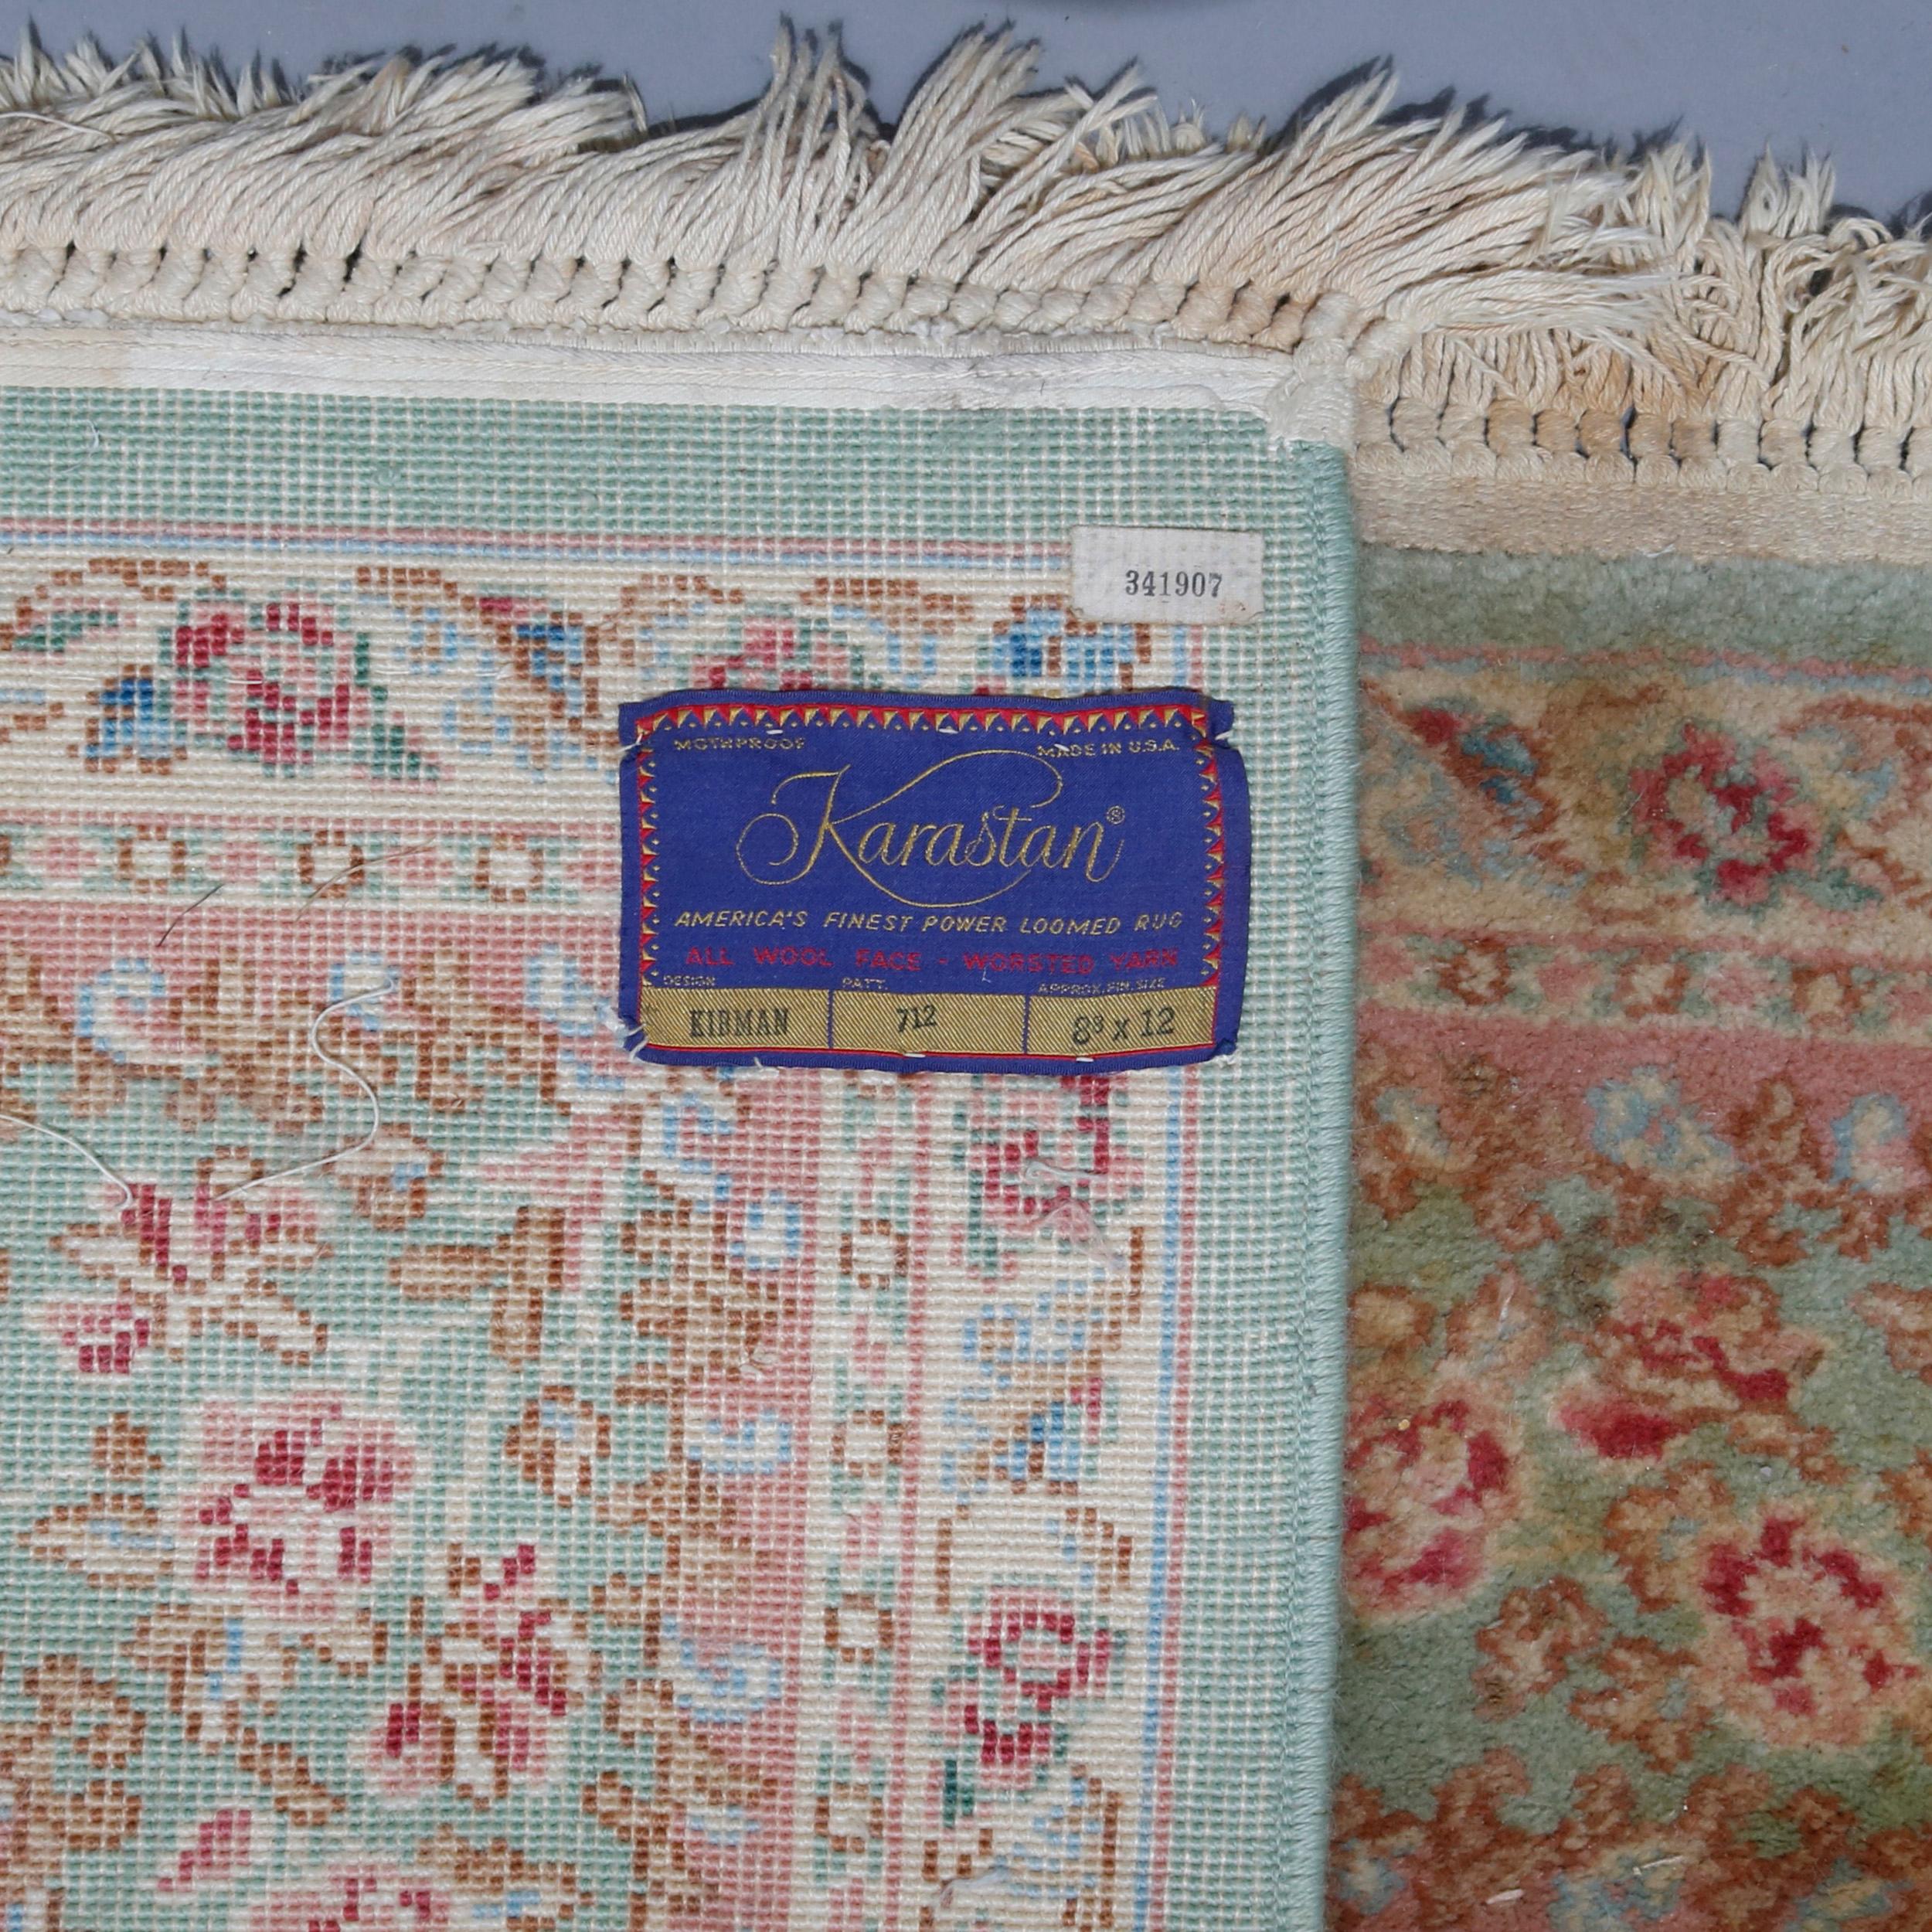 A vintage Persian Kirman style rug by Karastan offers mint central floral medallion on mint green ground, original label as photographed, circa 1950

***DELIVERY NOTICE – Due to COVID-19 we are employing NO-CONTACT PRACTICES in the transfer of